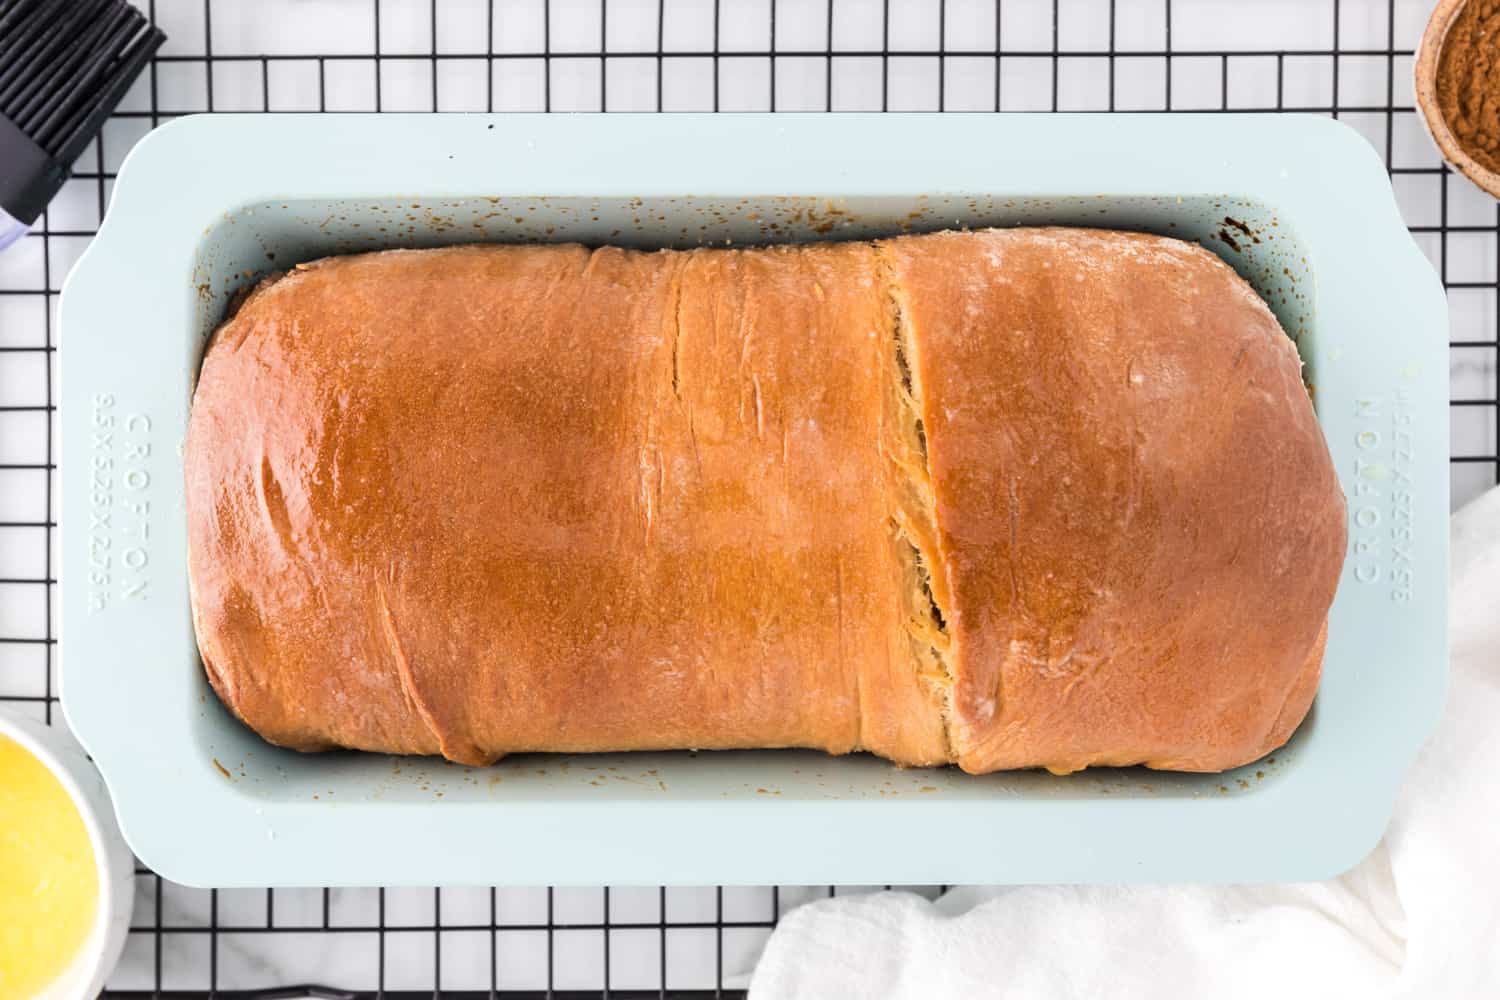 Baked bread, in loaf pan.